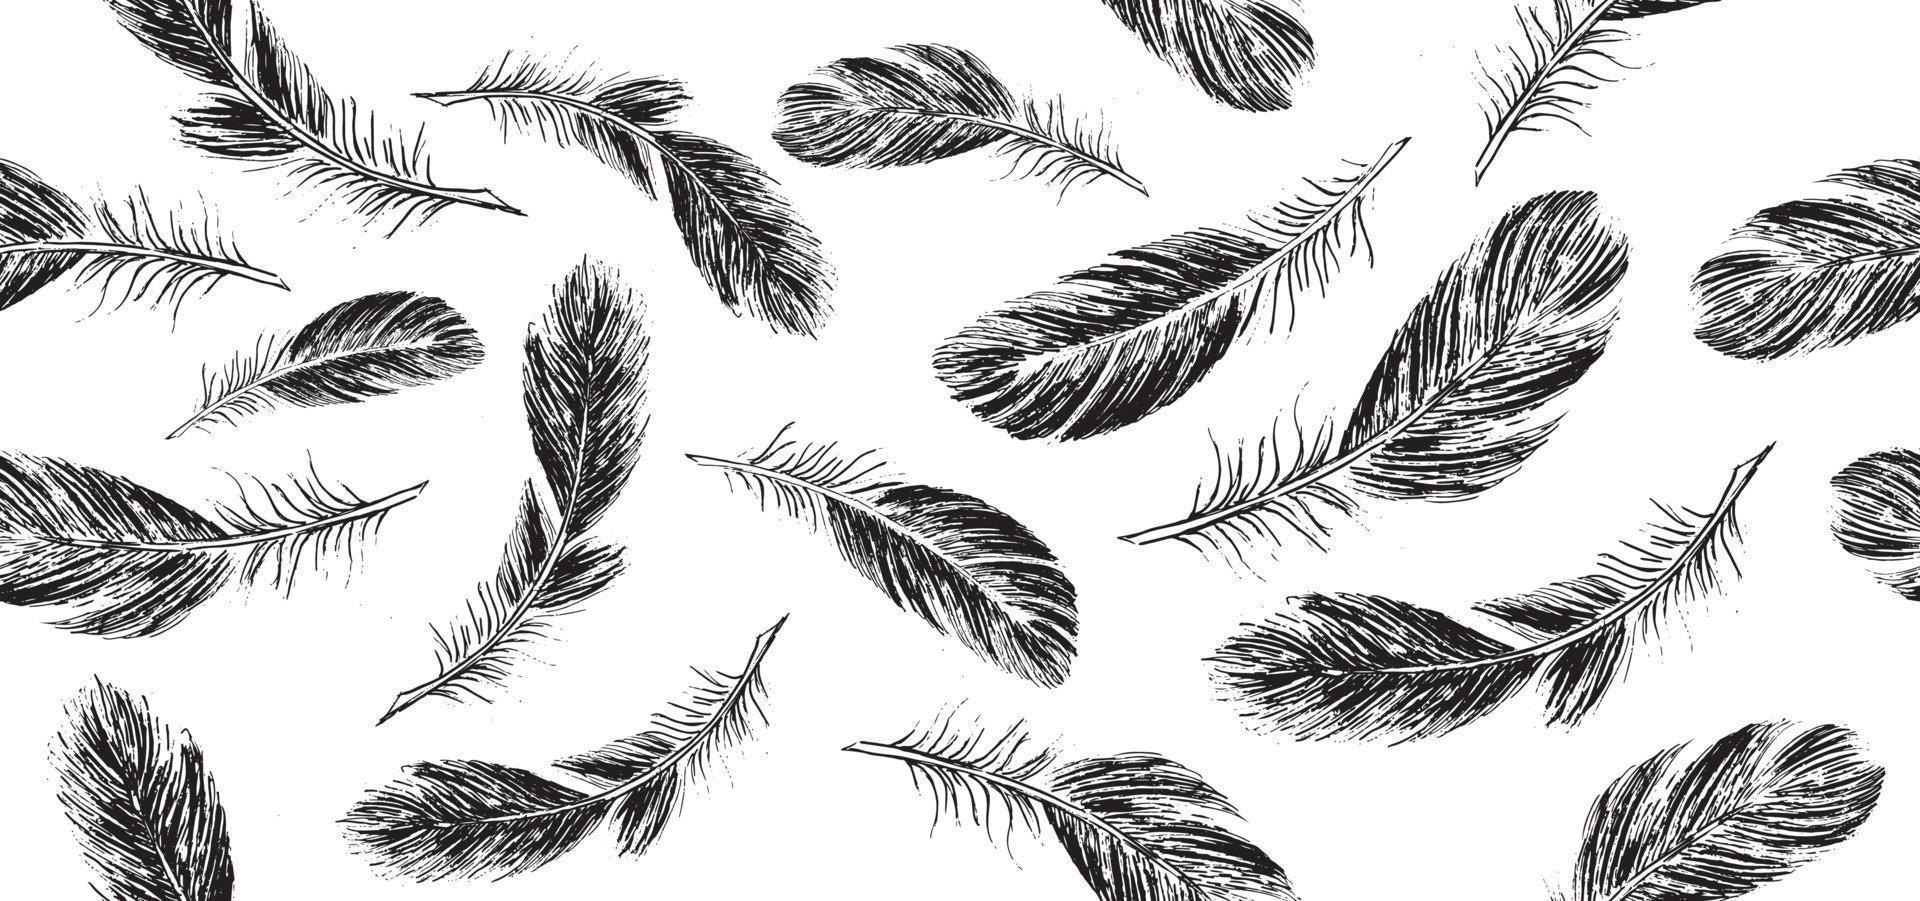 Feathers on white background. Hand drawn sketch style. vector